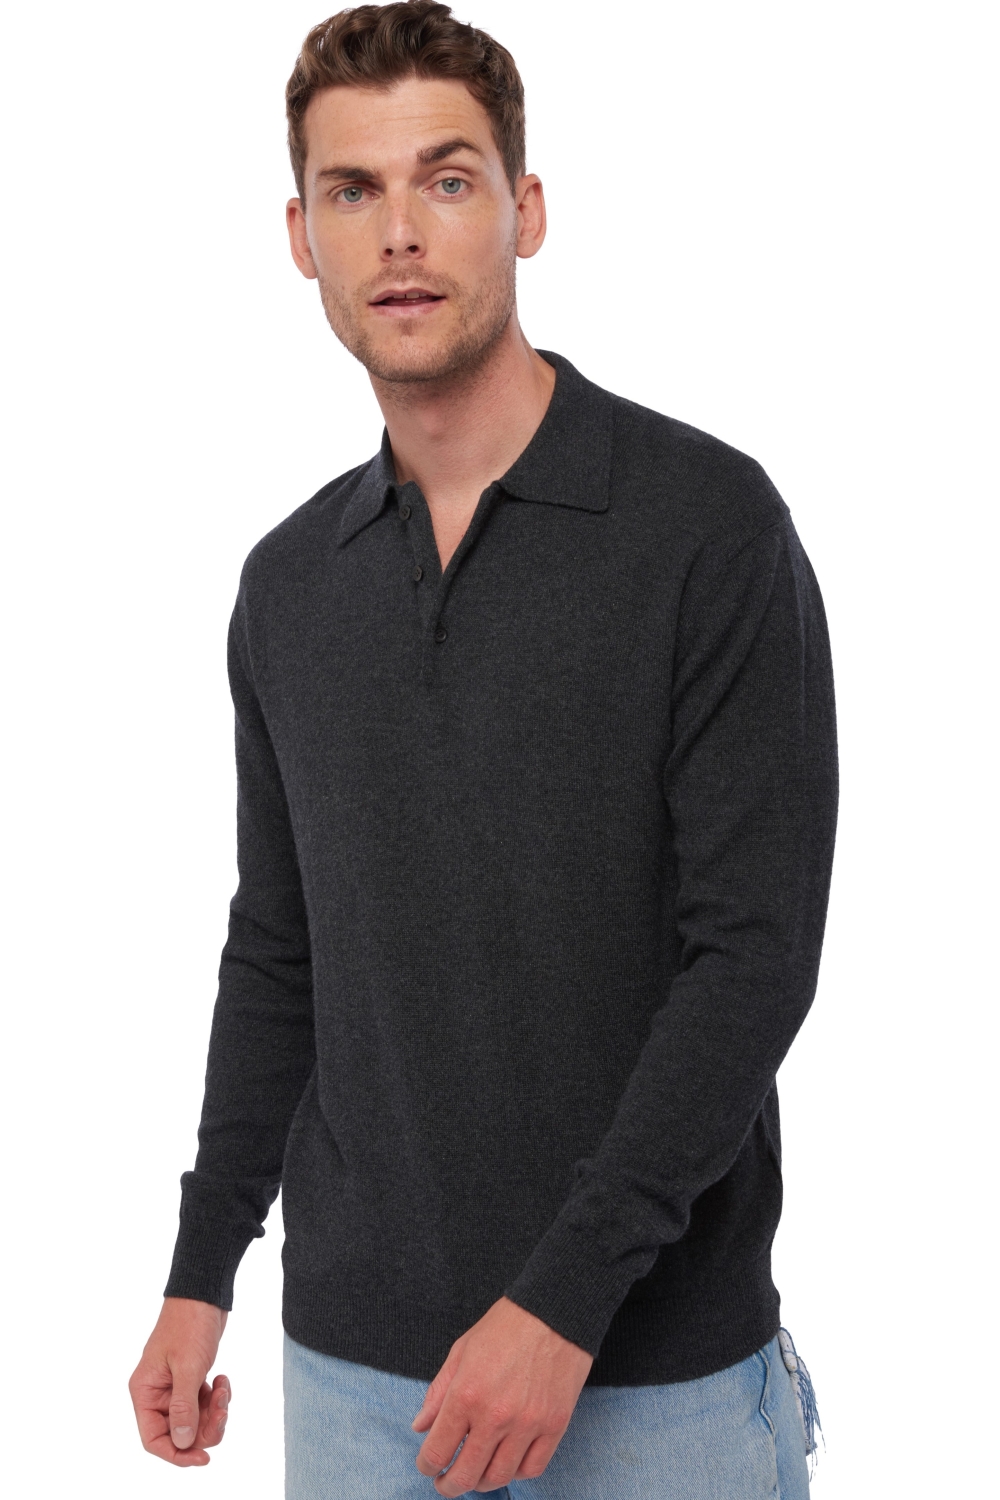 Cashmere men polo style sweaters alexandre charcoal marl 4xl